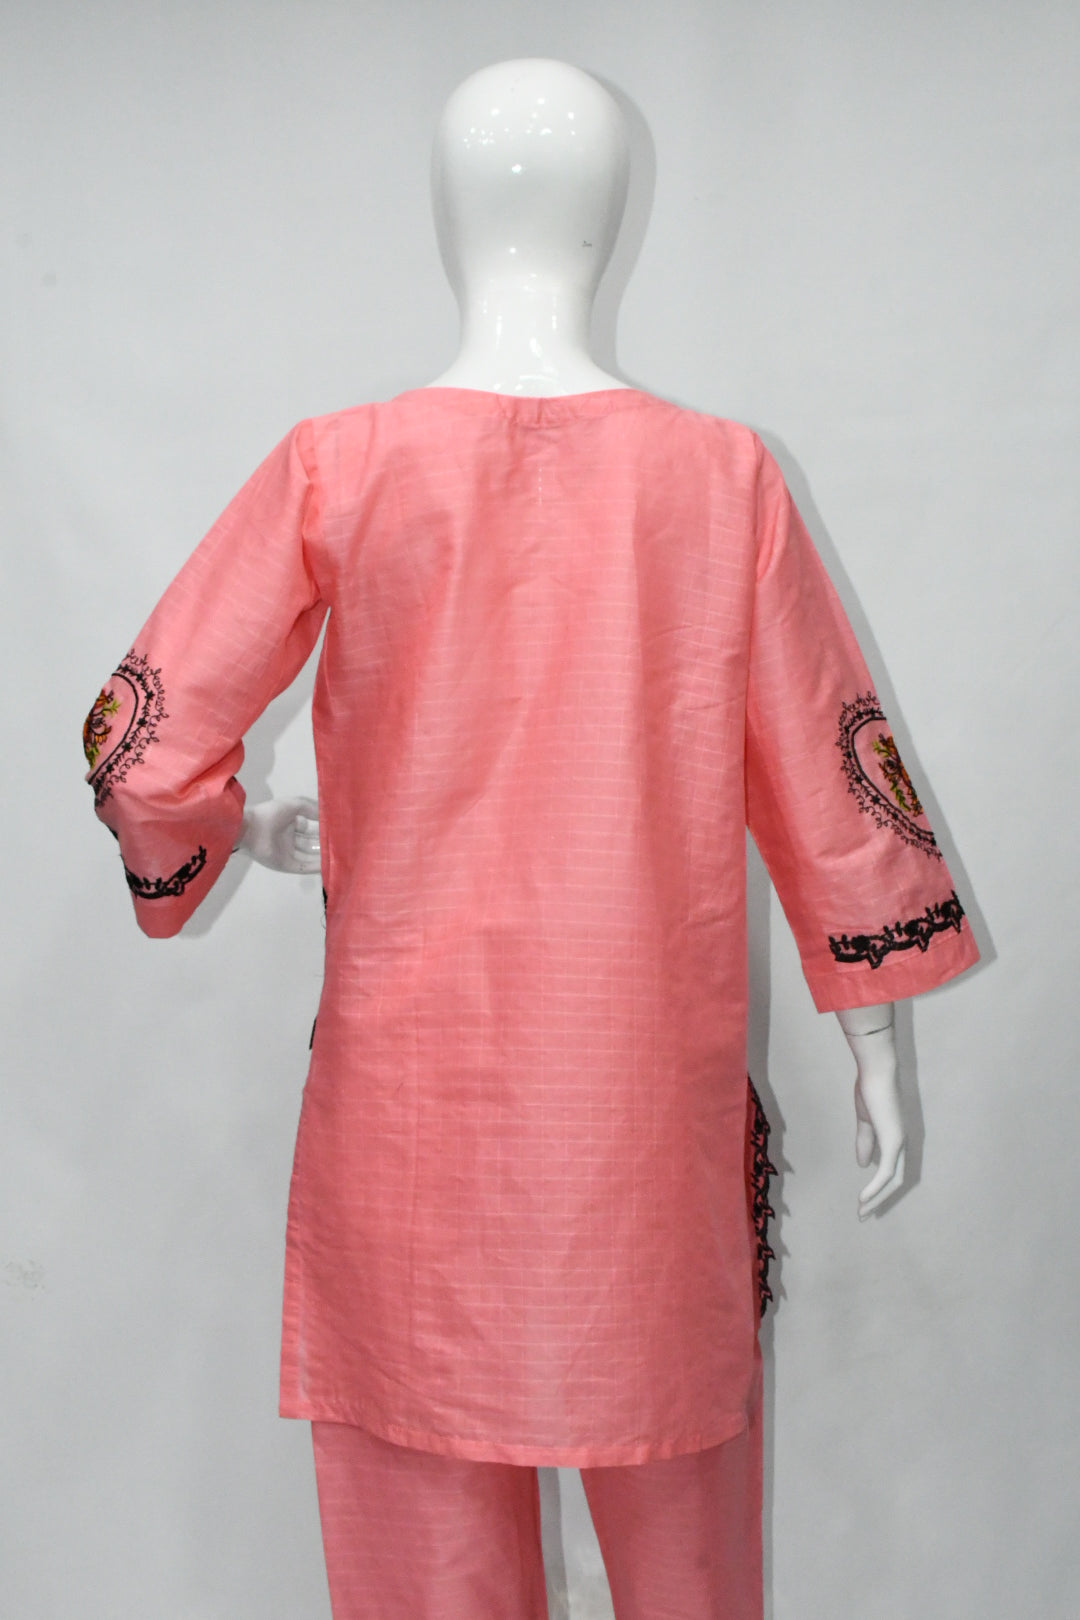 Rose Pink Vintage Embroidered Shirt and Trouser